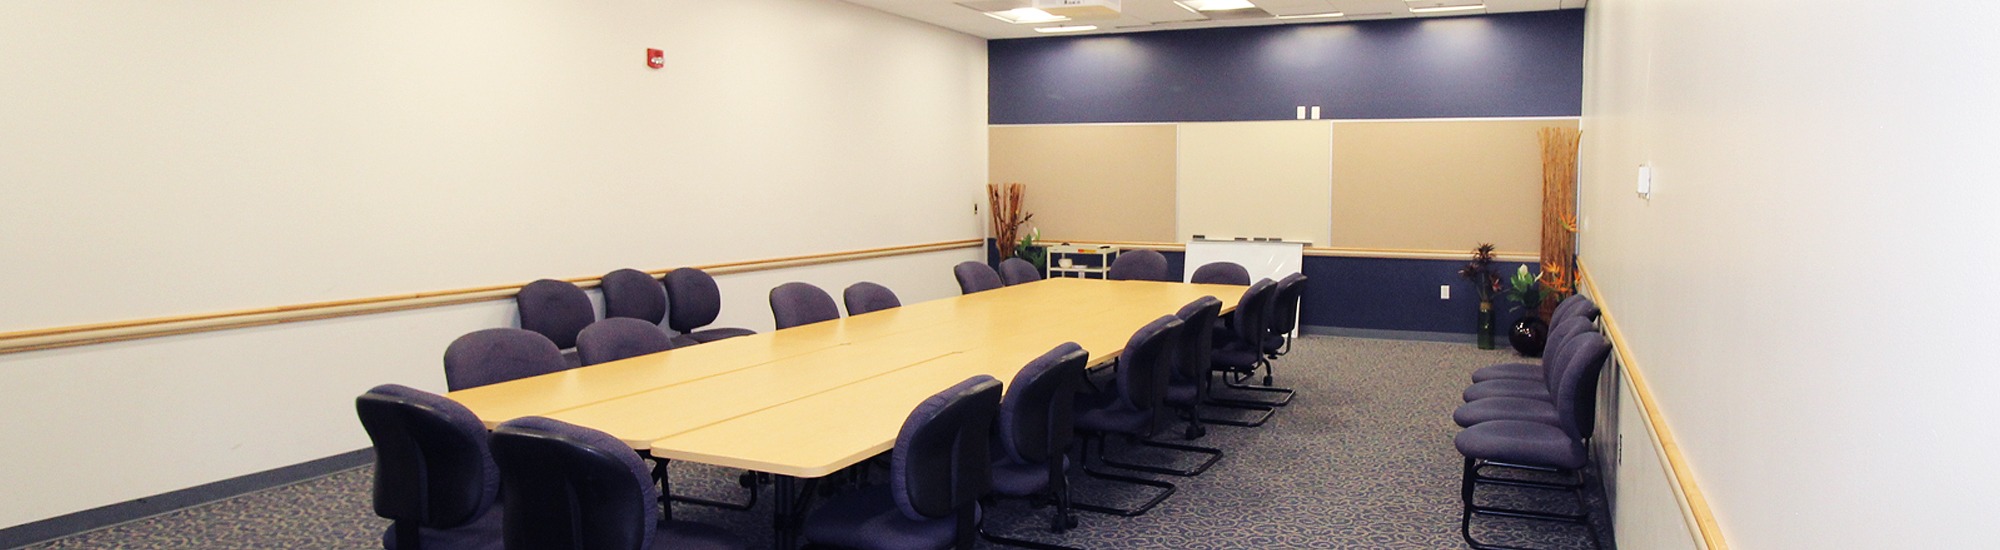 Conference table surrounded by chairs, whiteboard on the wall